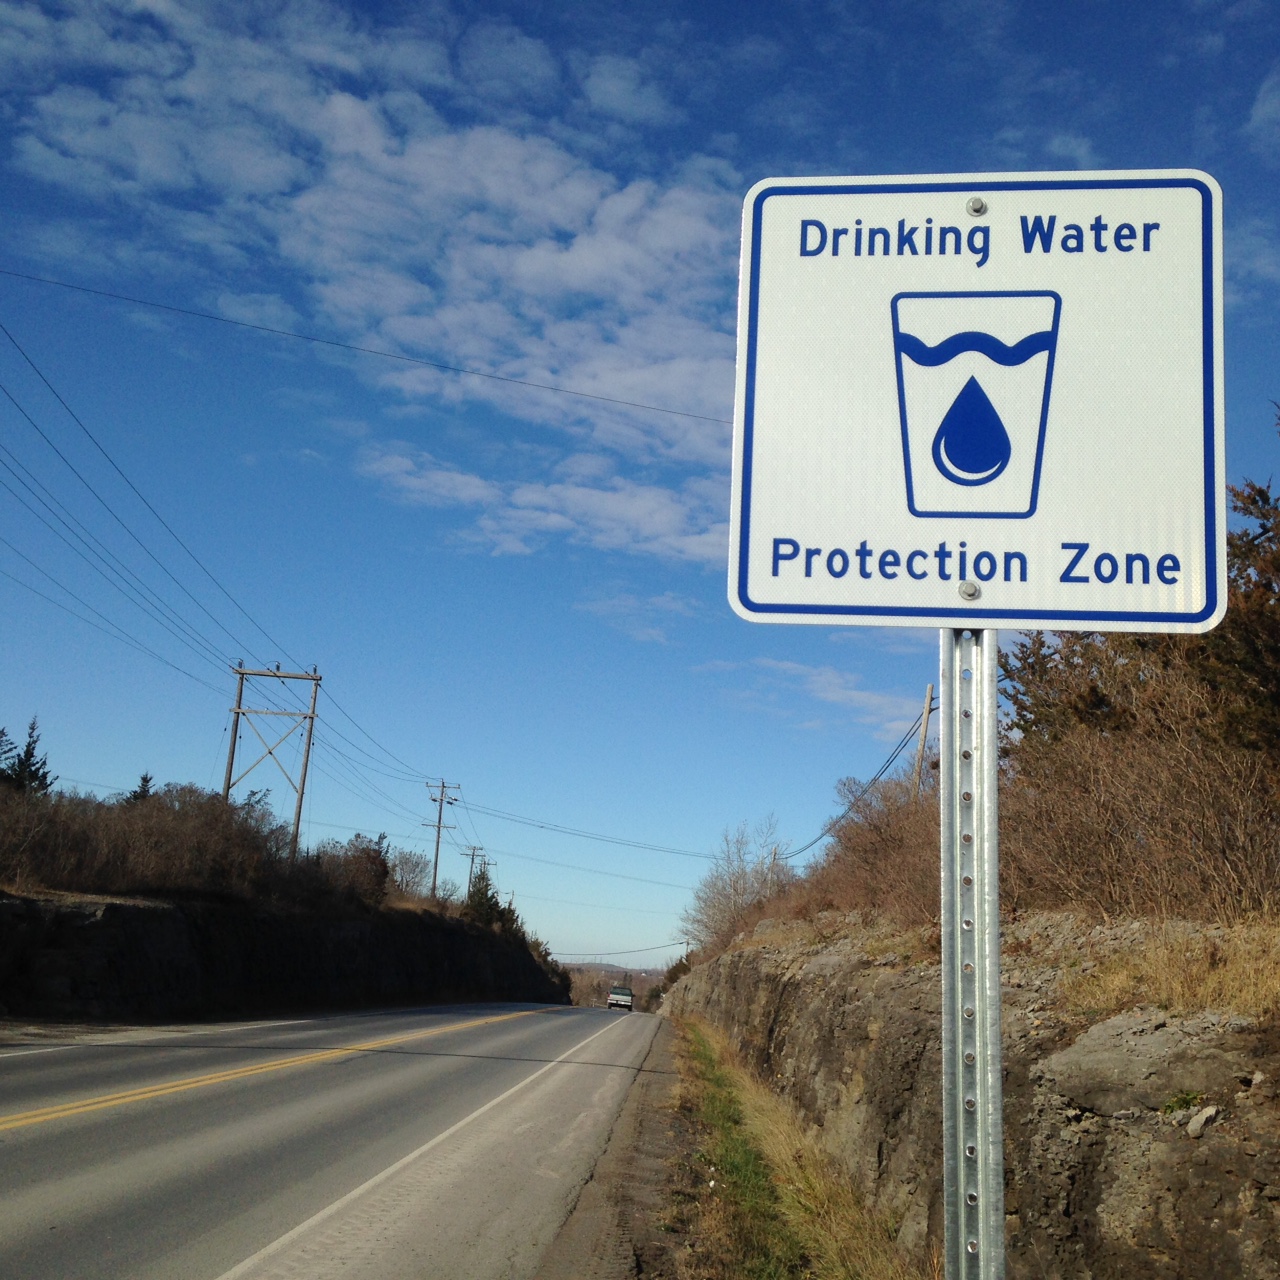 The first of Ontario's new Drinking Water Protection Zone road signs was installed in the Town of Greater Napanee